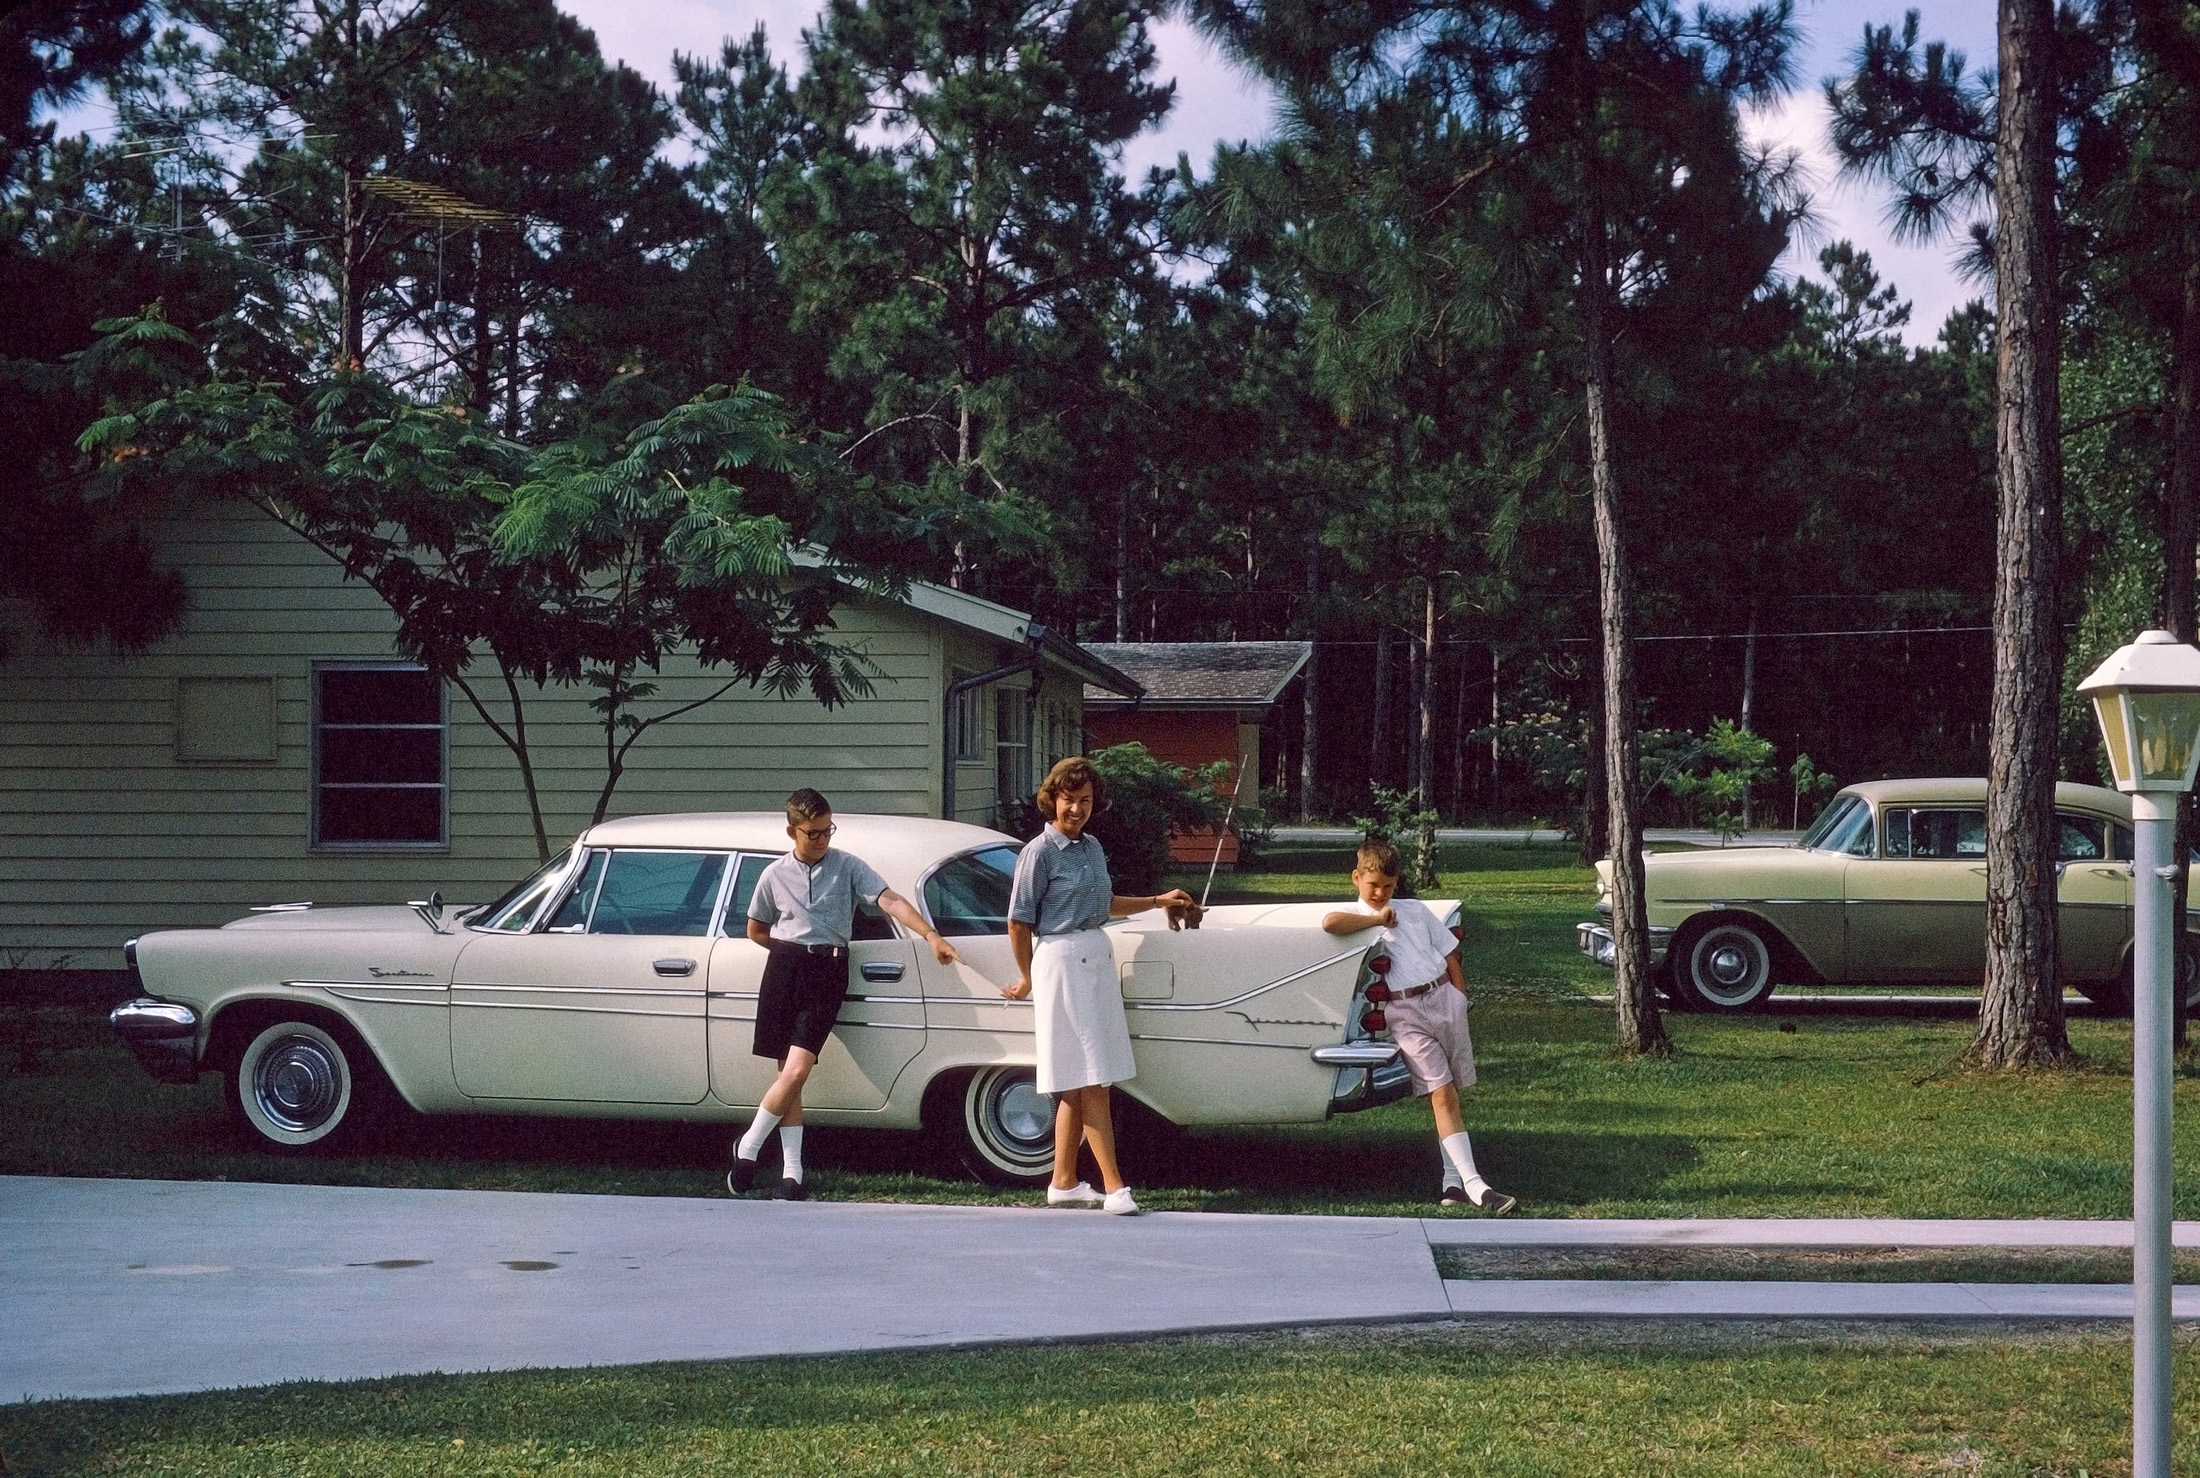 This photo, showing our 1958 DeSoto Firesweep (thanks, ptcruiser, for the ID!), was taken in Apalachicola, Florida, in 1964. I'm at the left, pointing seemingly at nothing, along with my mom, my brother Jeffrey and our new Chihuahua, Tiger. My dad, as a pilot, was always on the lookout for a great place to keep his airplanes, and Apalach had an abandoned Army Air Force training field with big empty hangars to spare. View full size.